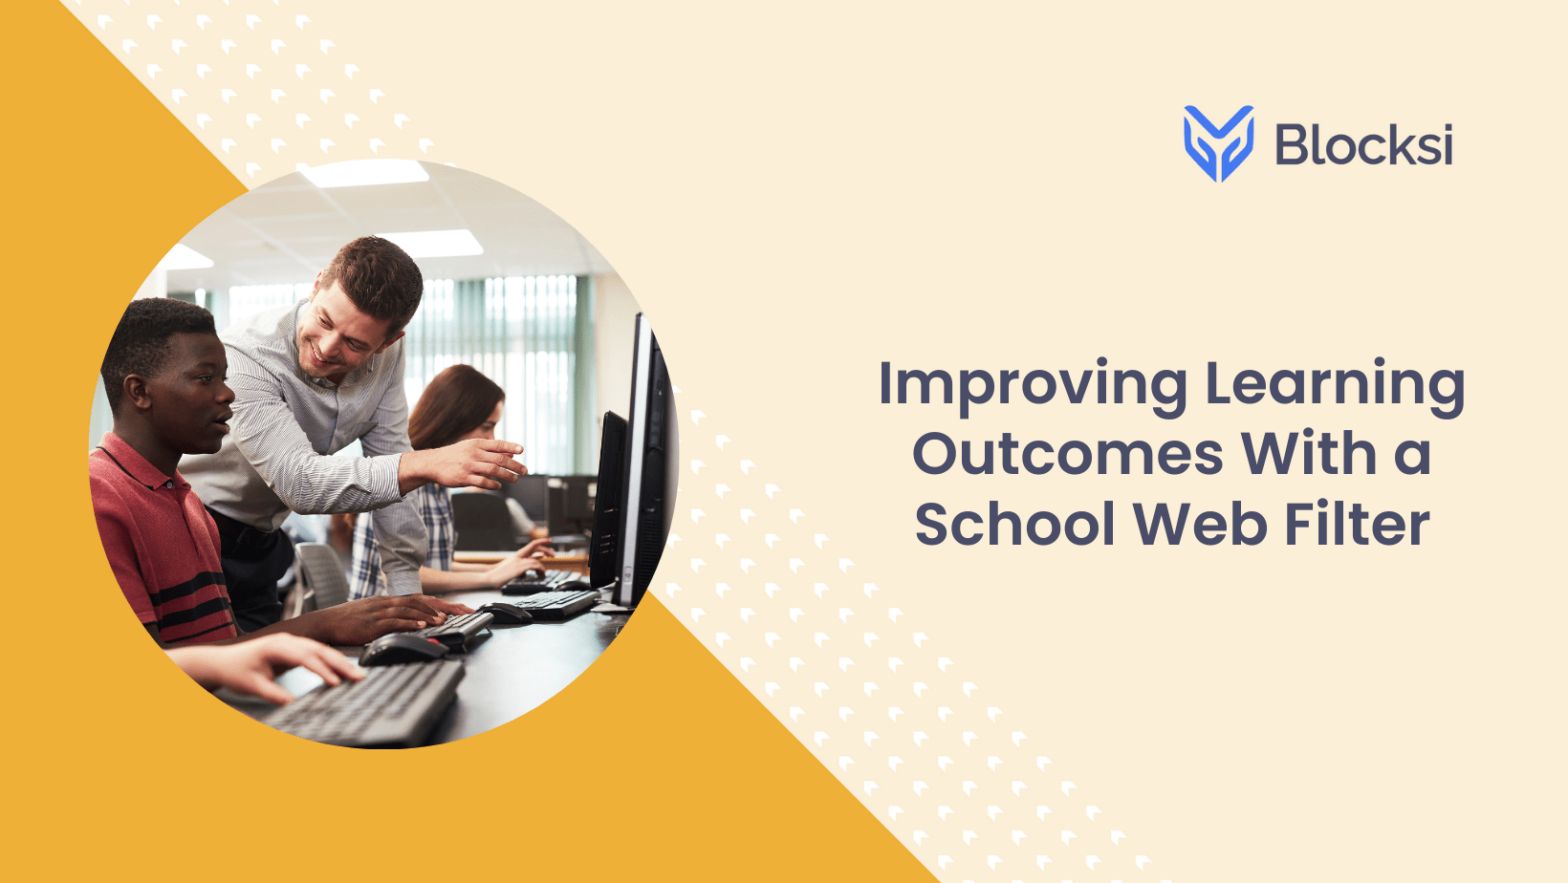 Improving Learning Outcomes With a School Web Filter